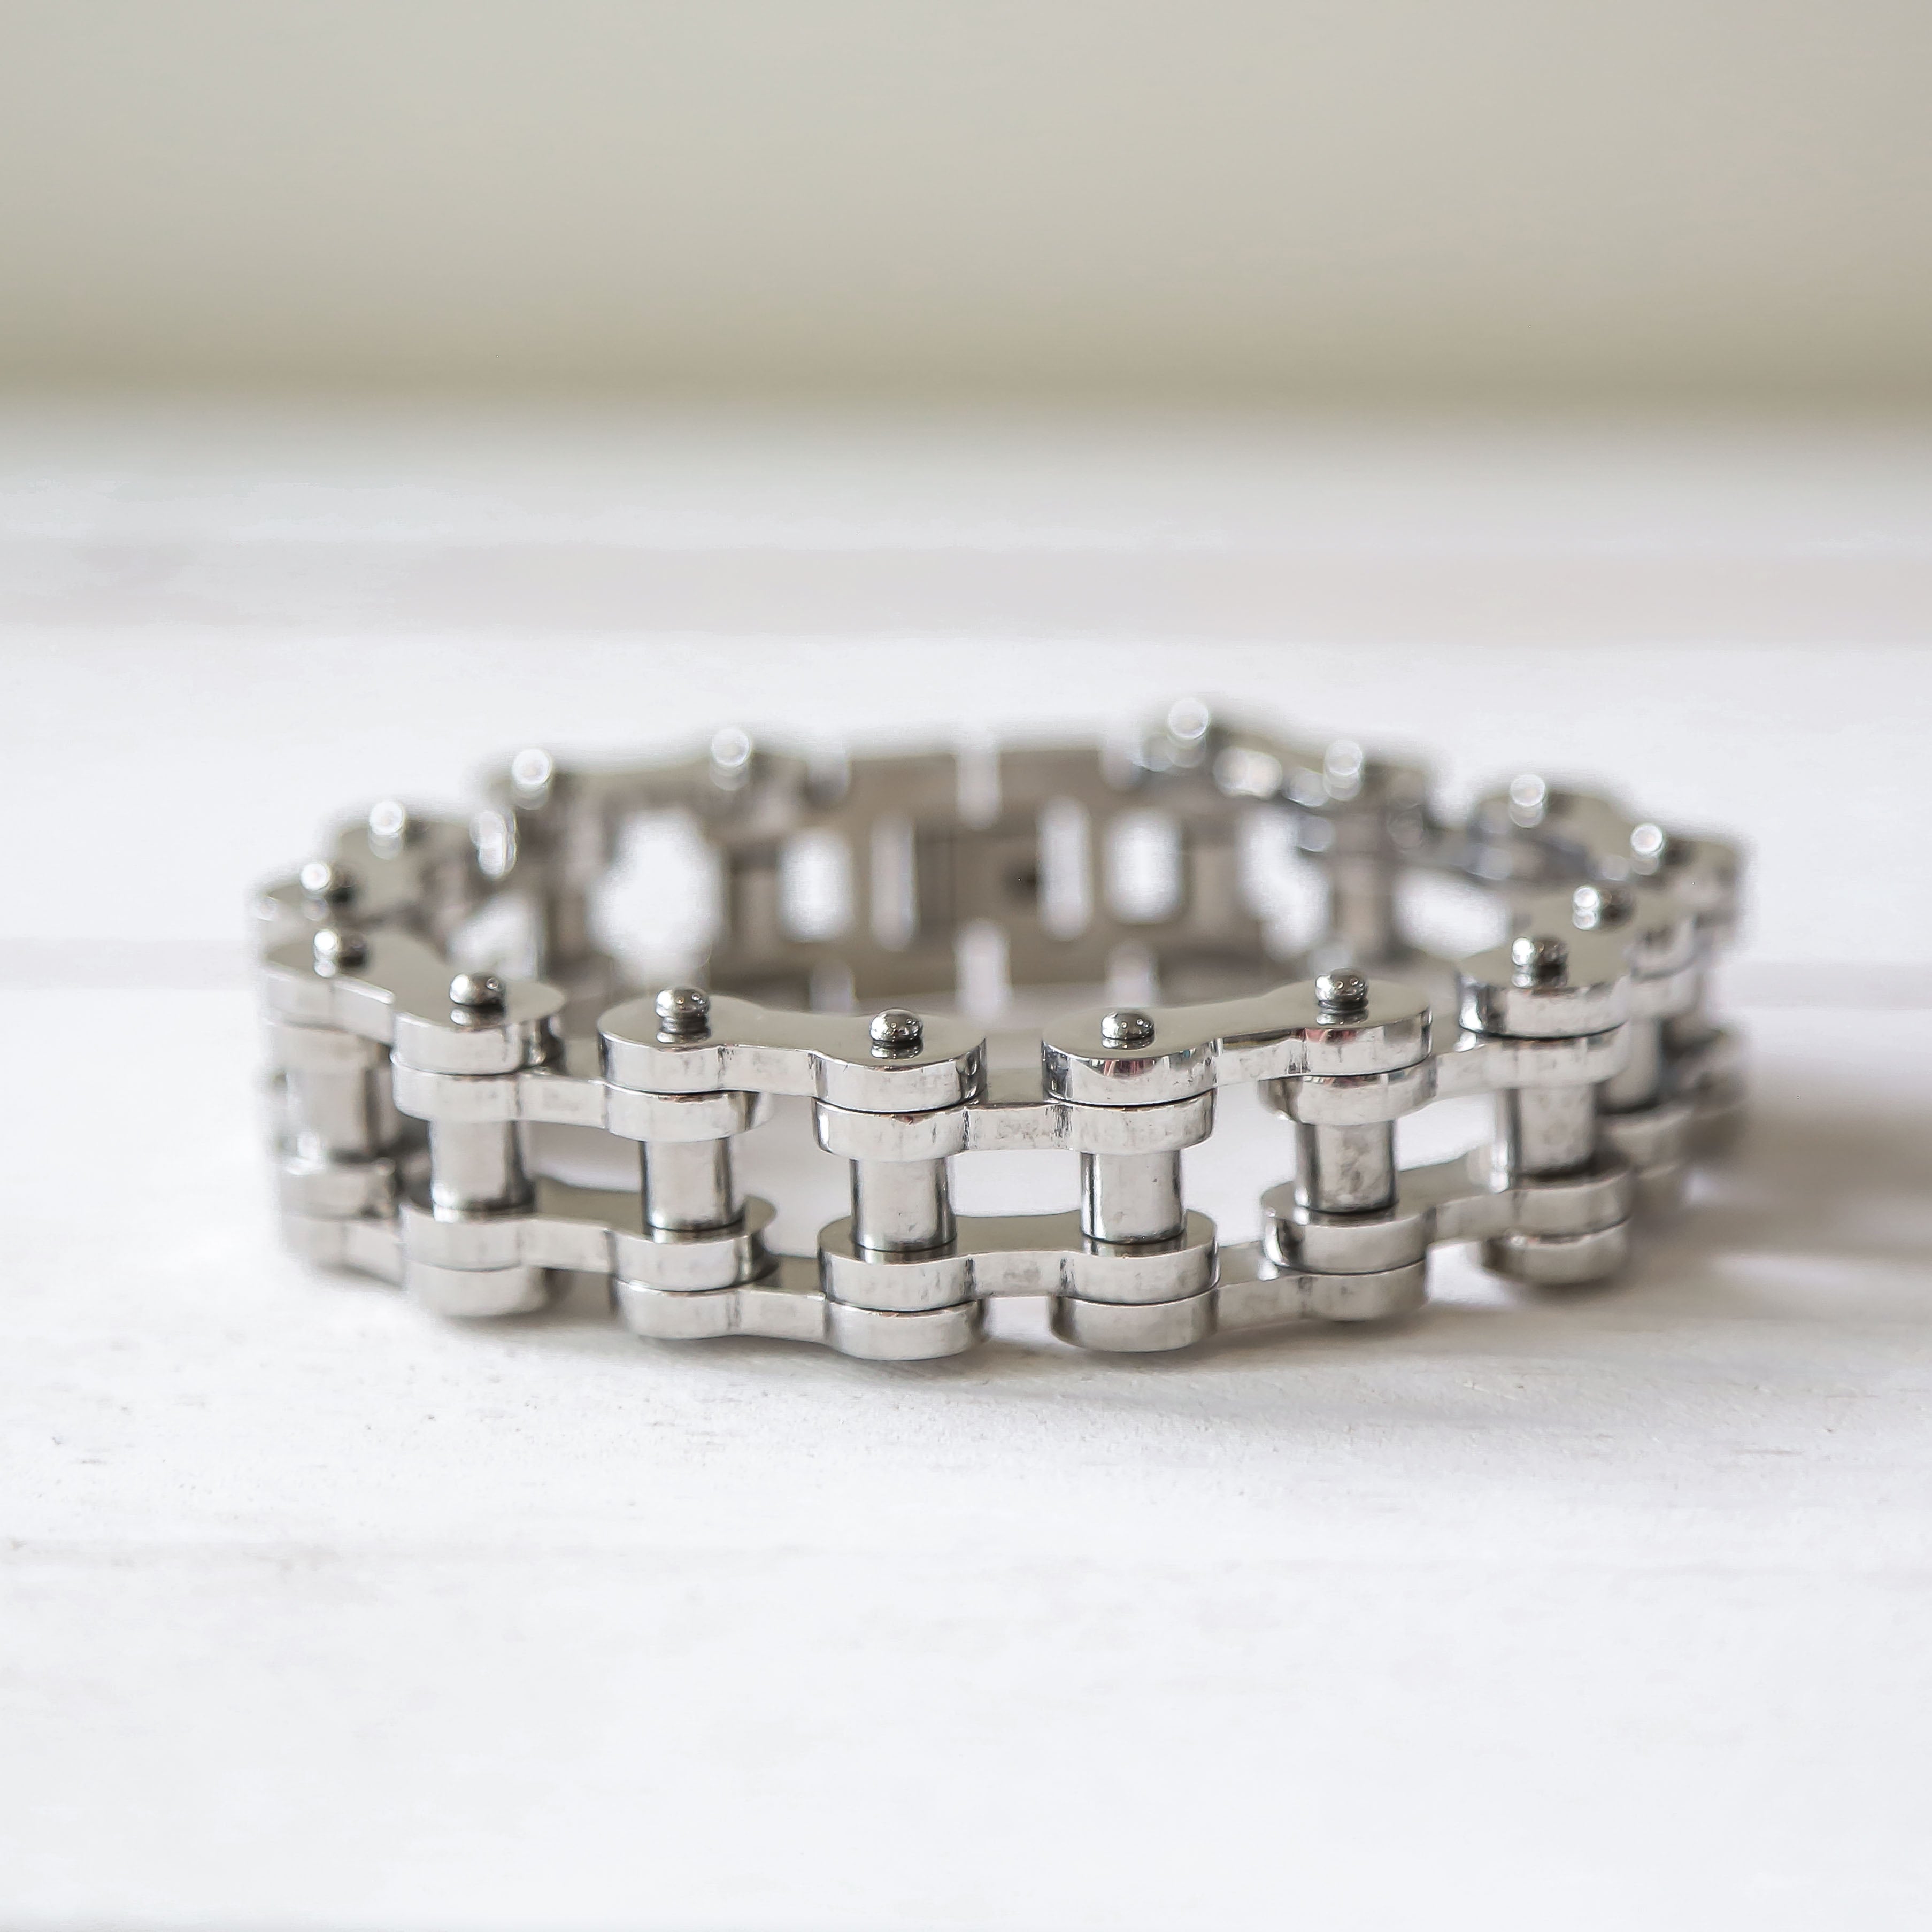 a close up of a metal bracelet on a table